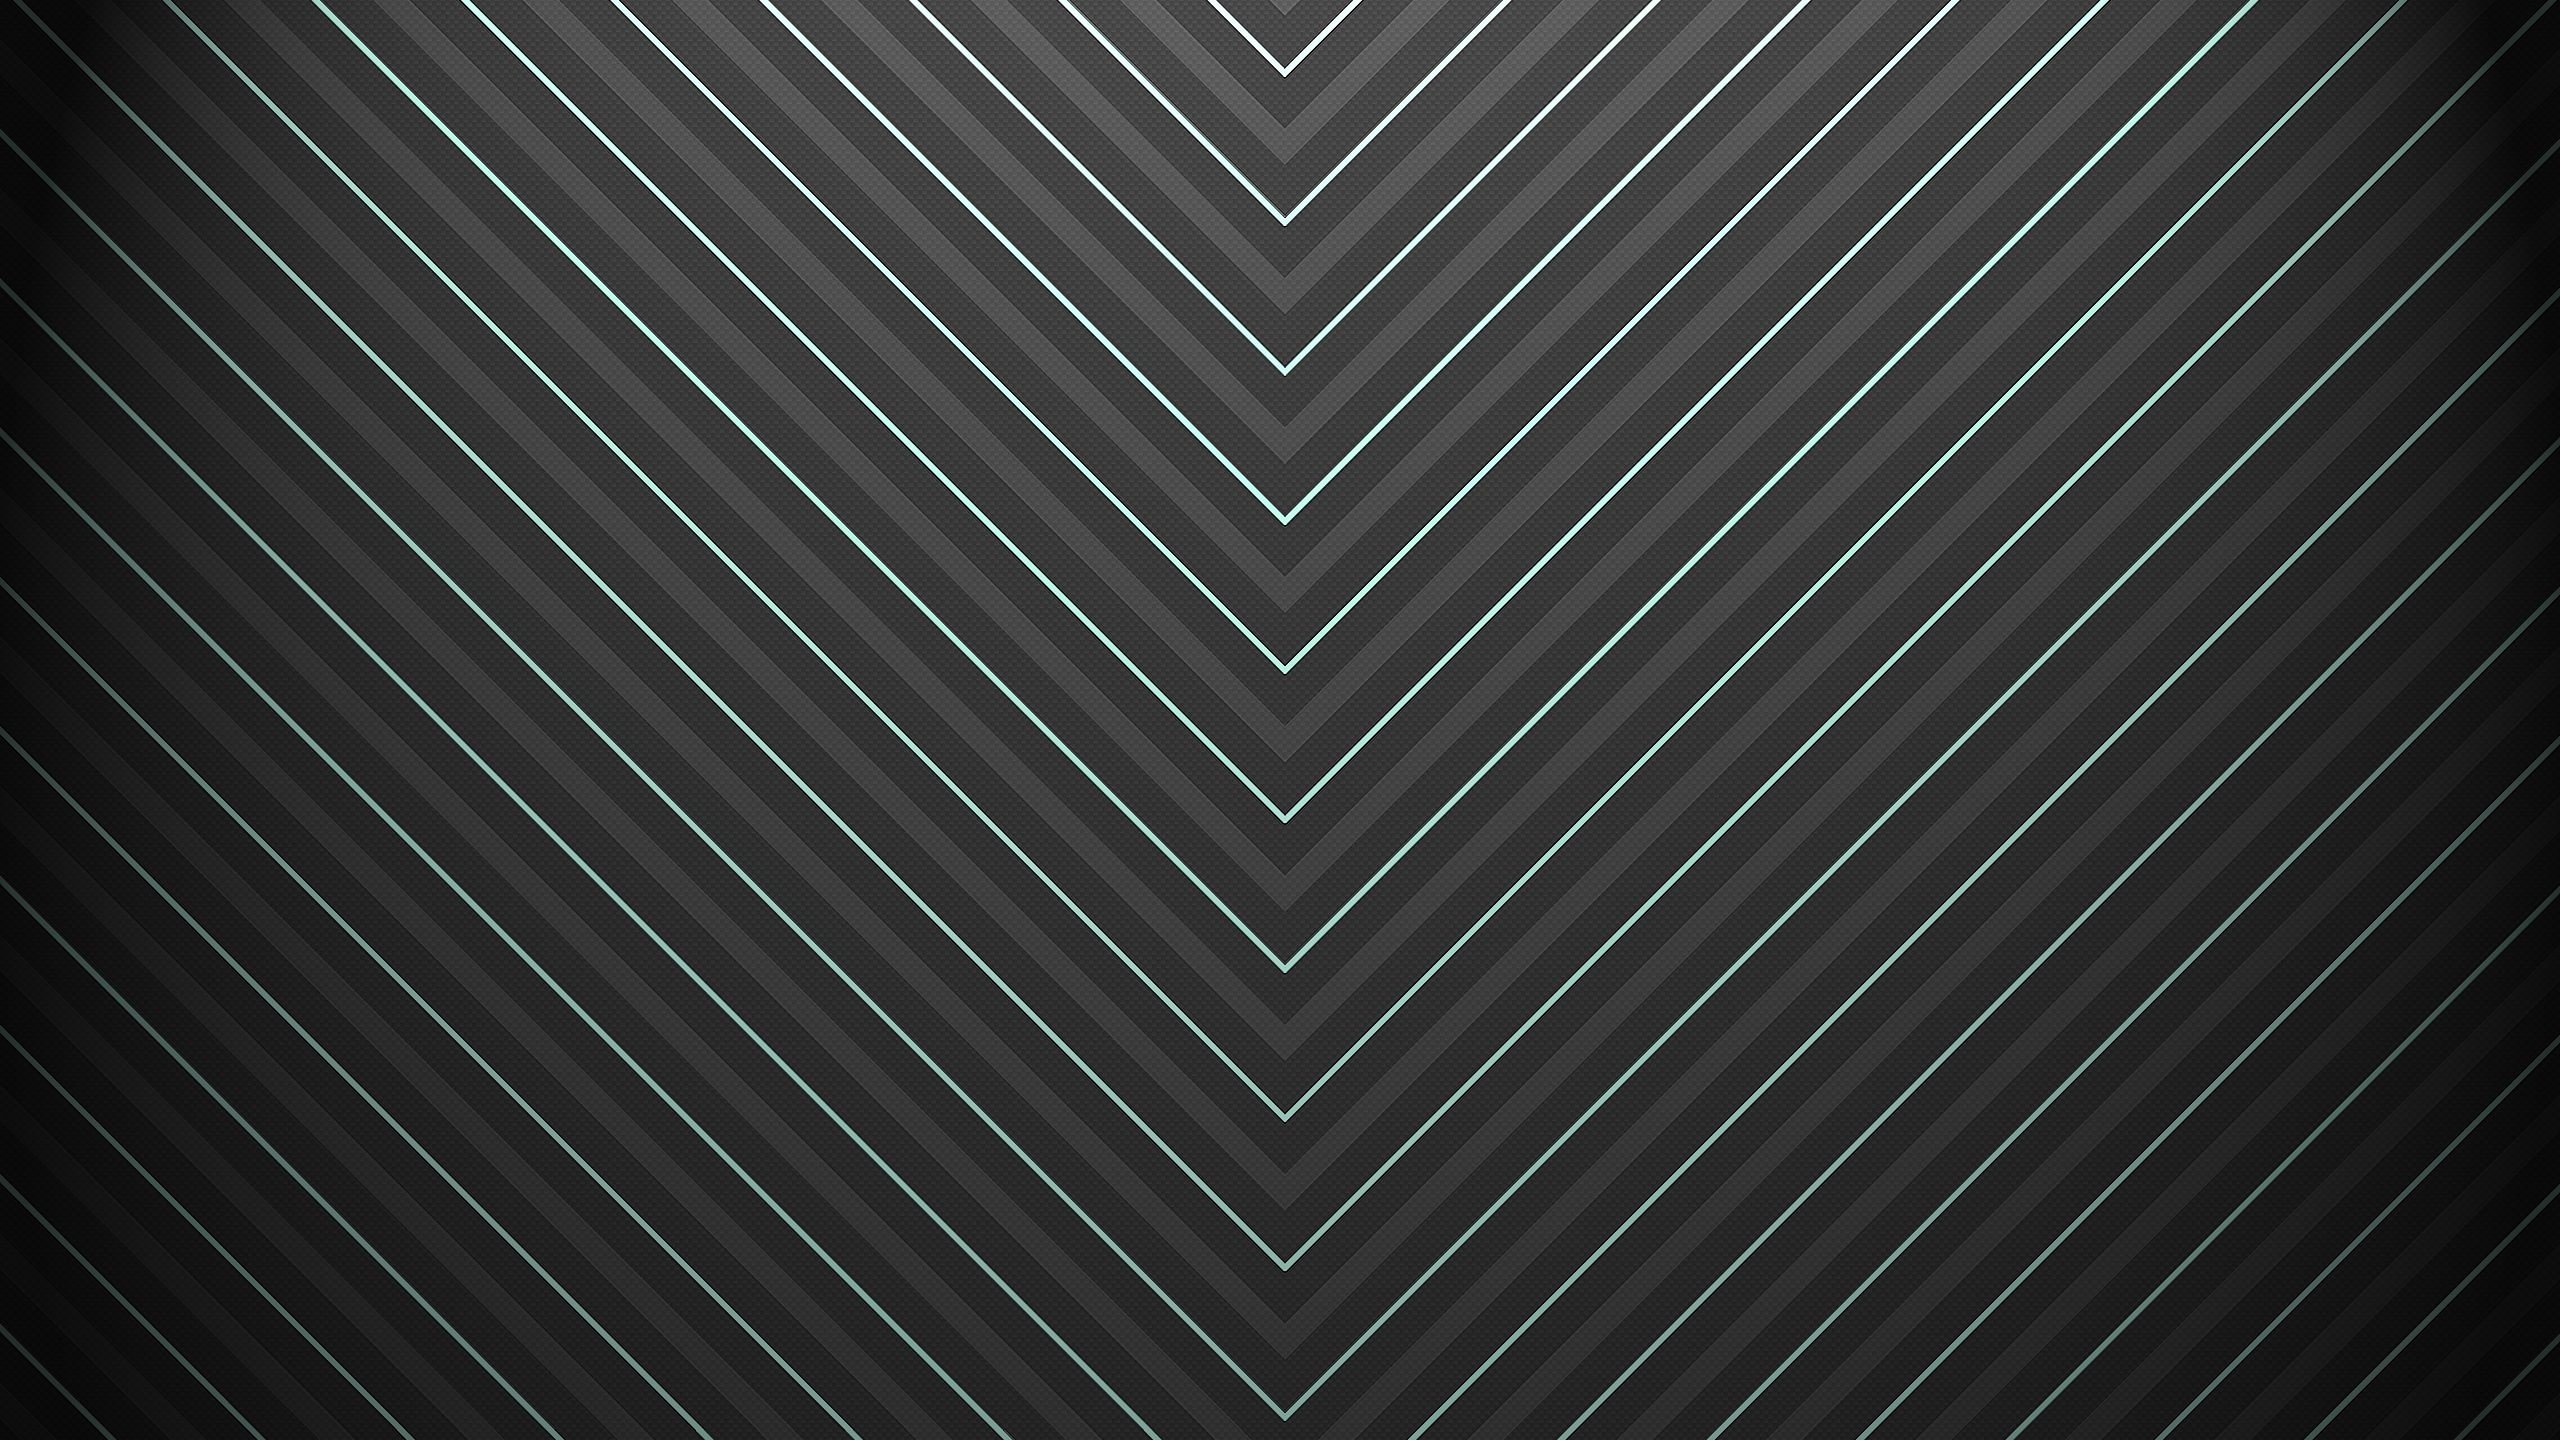 Cool pattern wallpapers